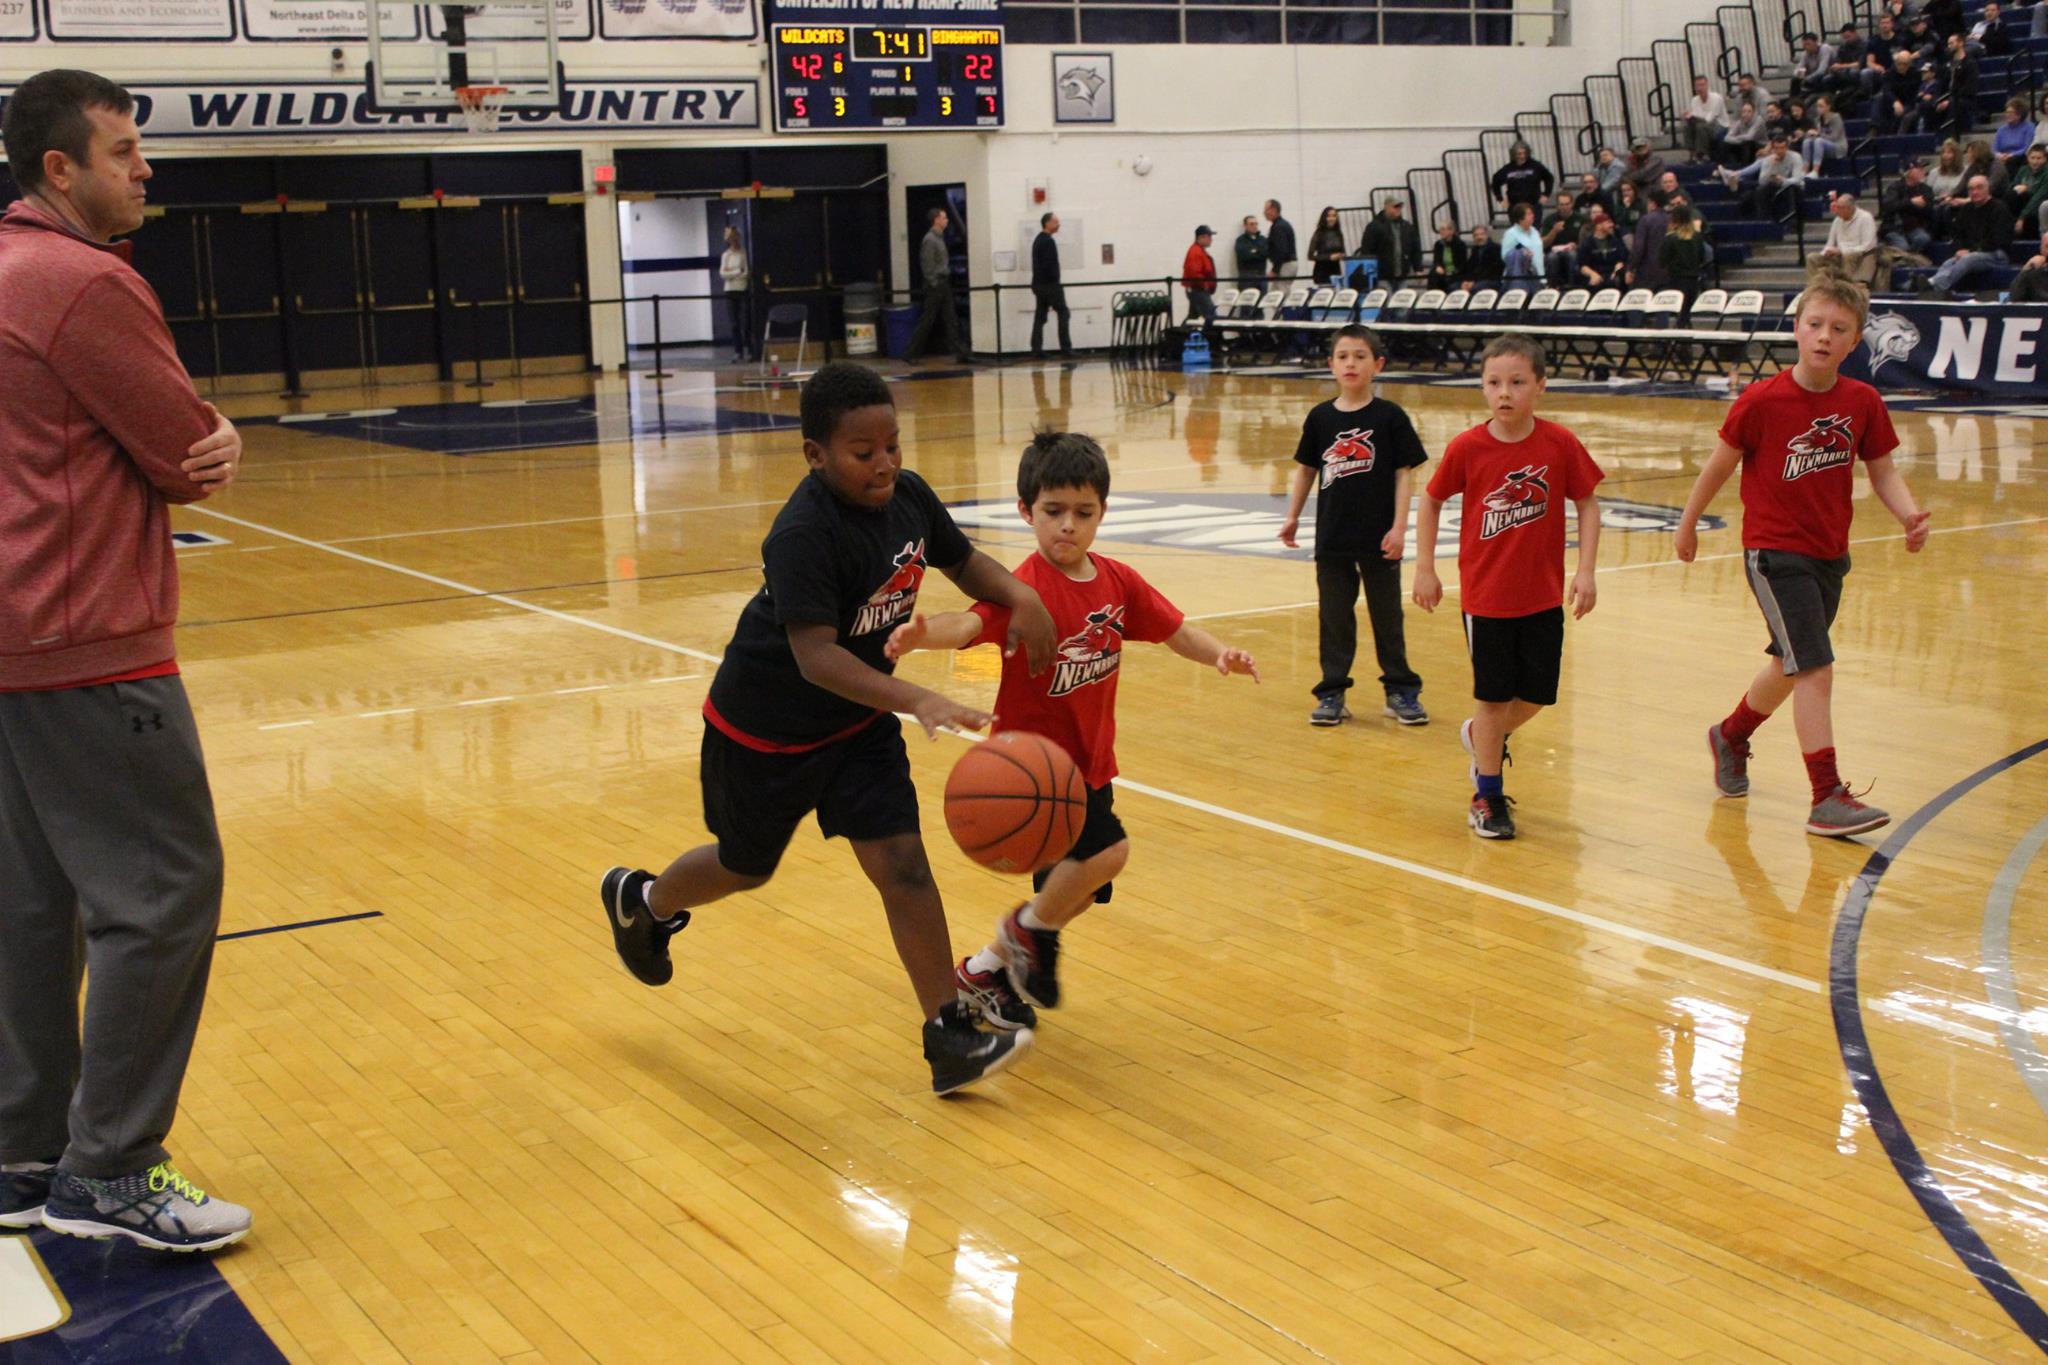 Establish a positive environment to learn the game of basketball